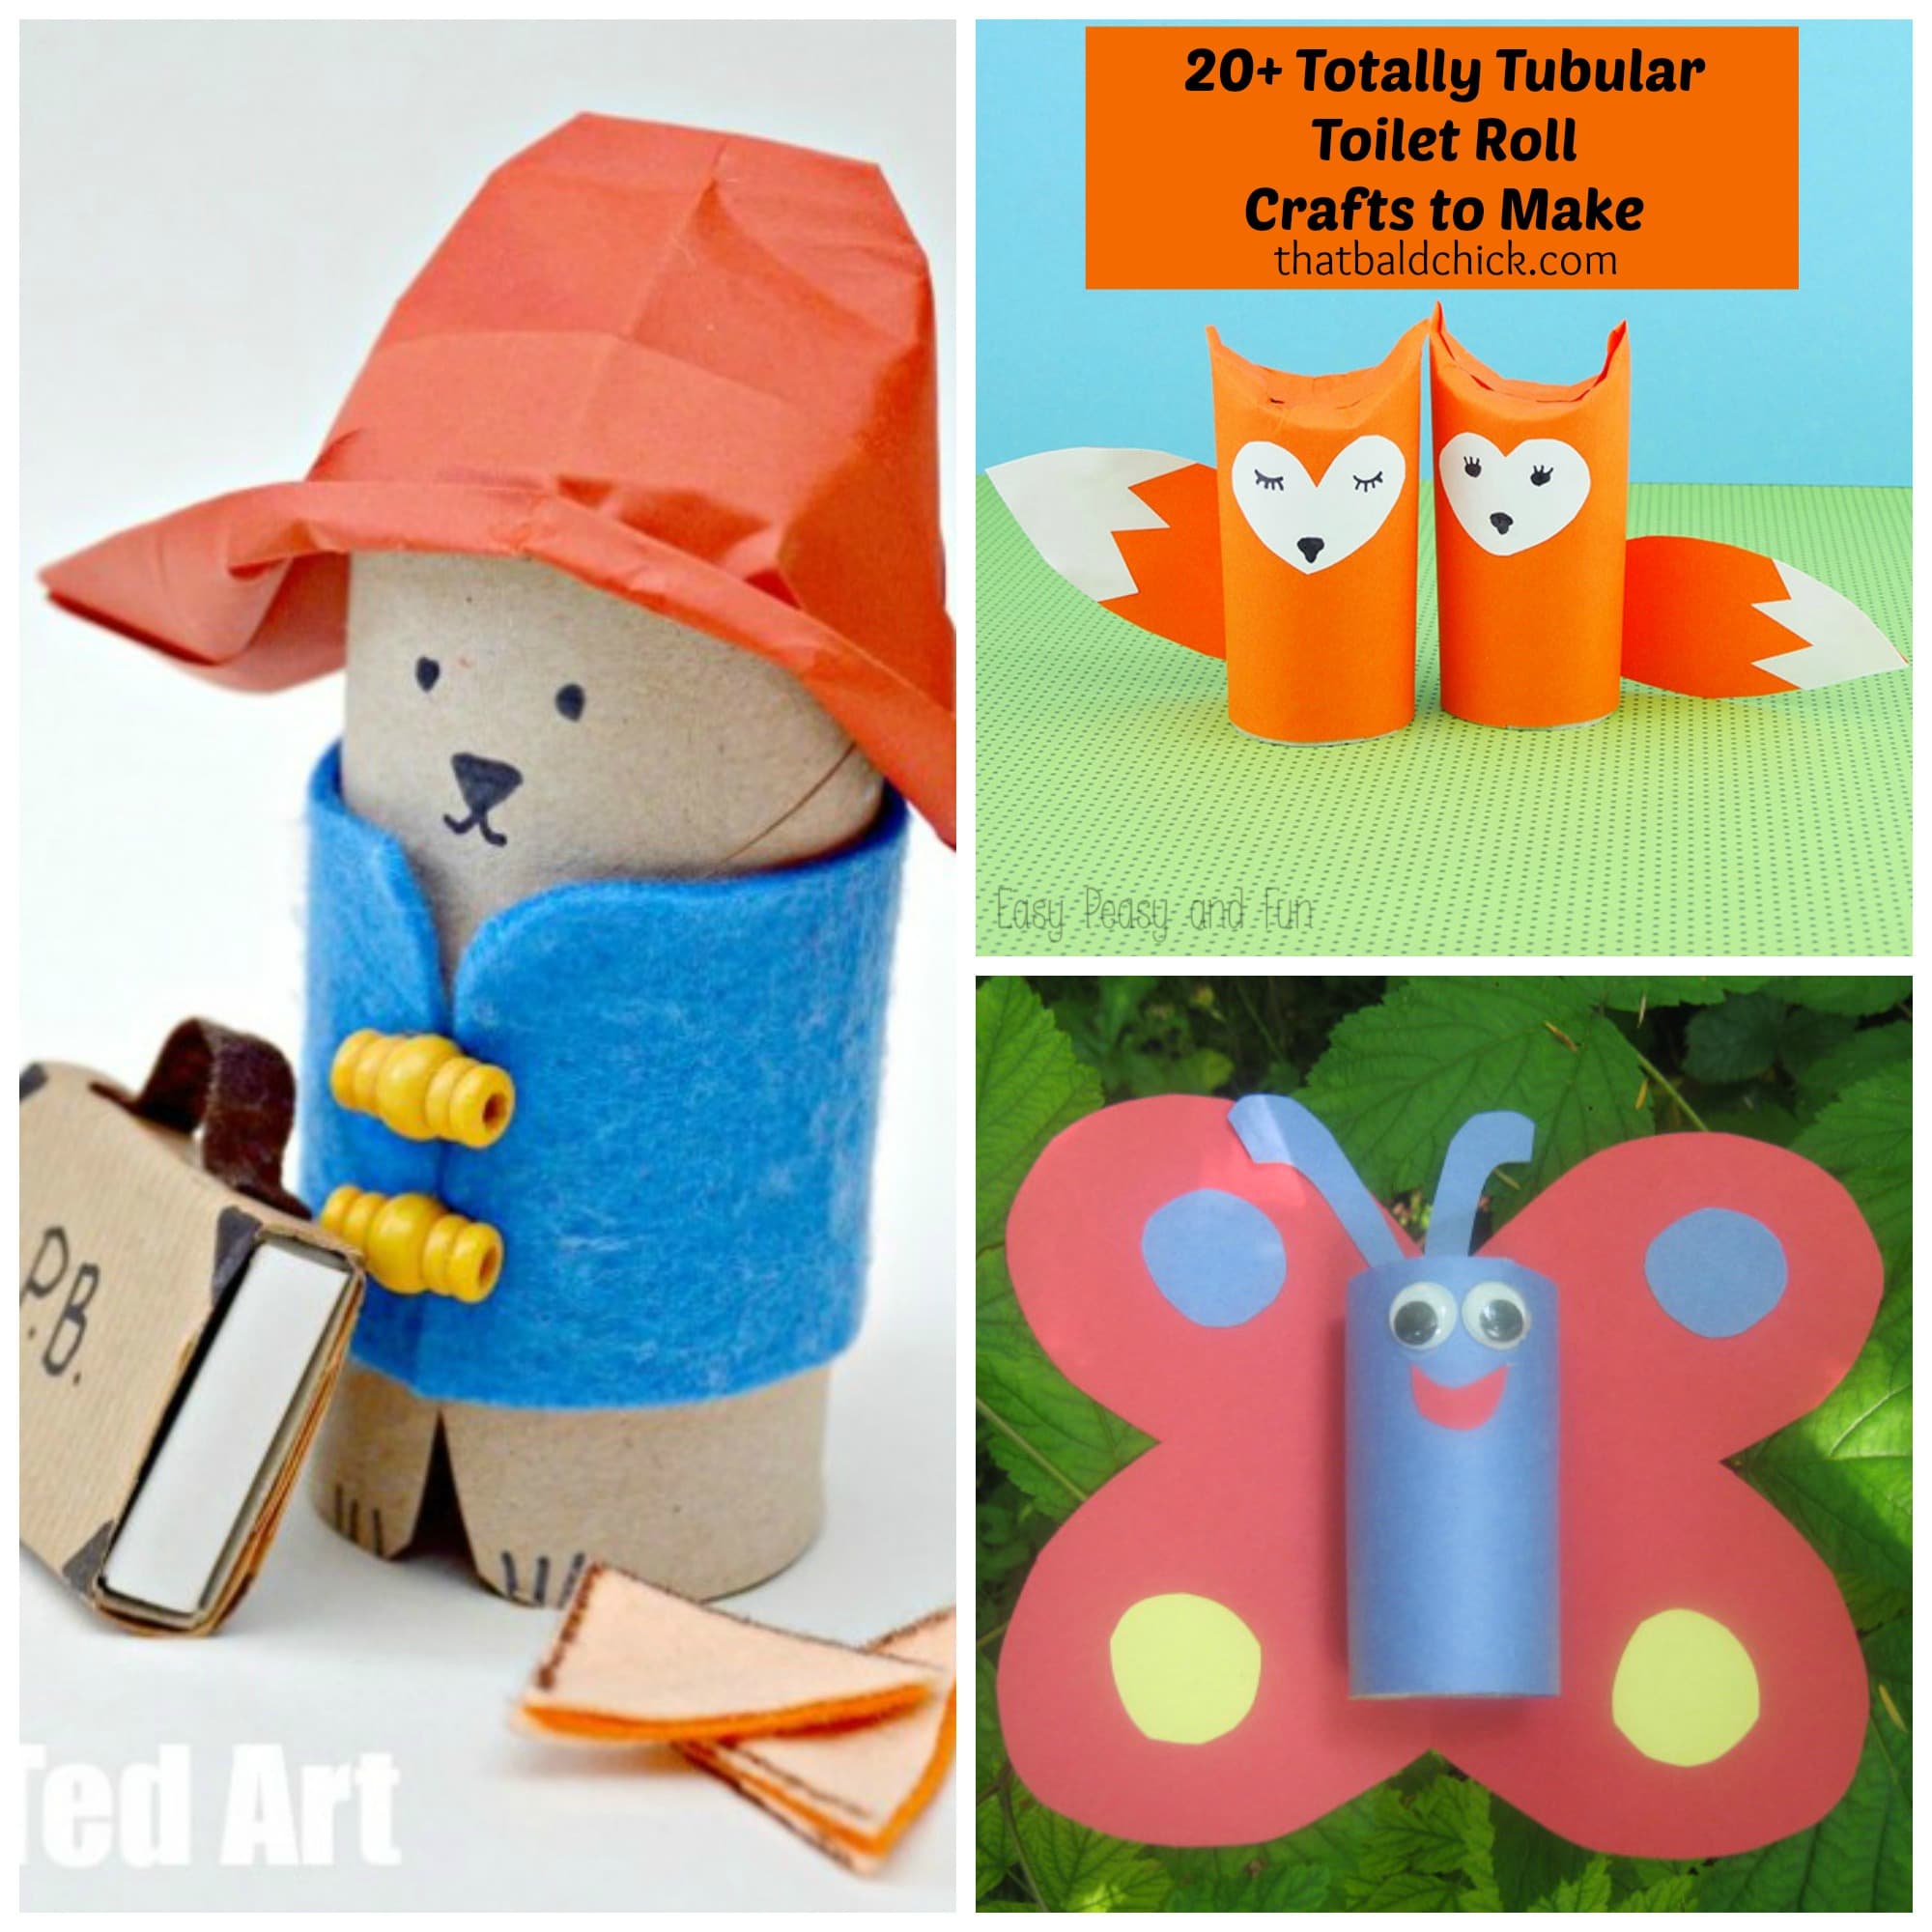 20+ Totally Tubular Toilet Roll Crafts to Make at thatbaldchick.com